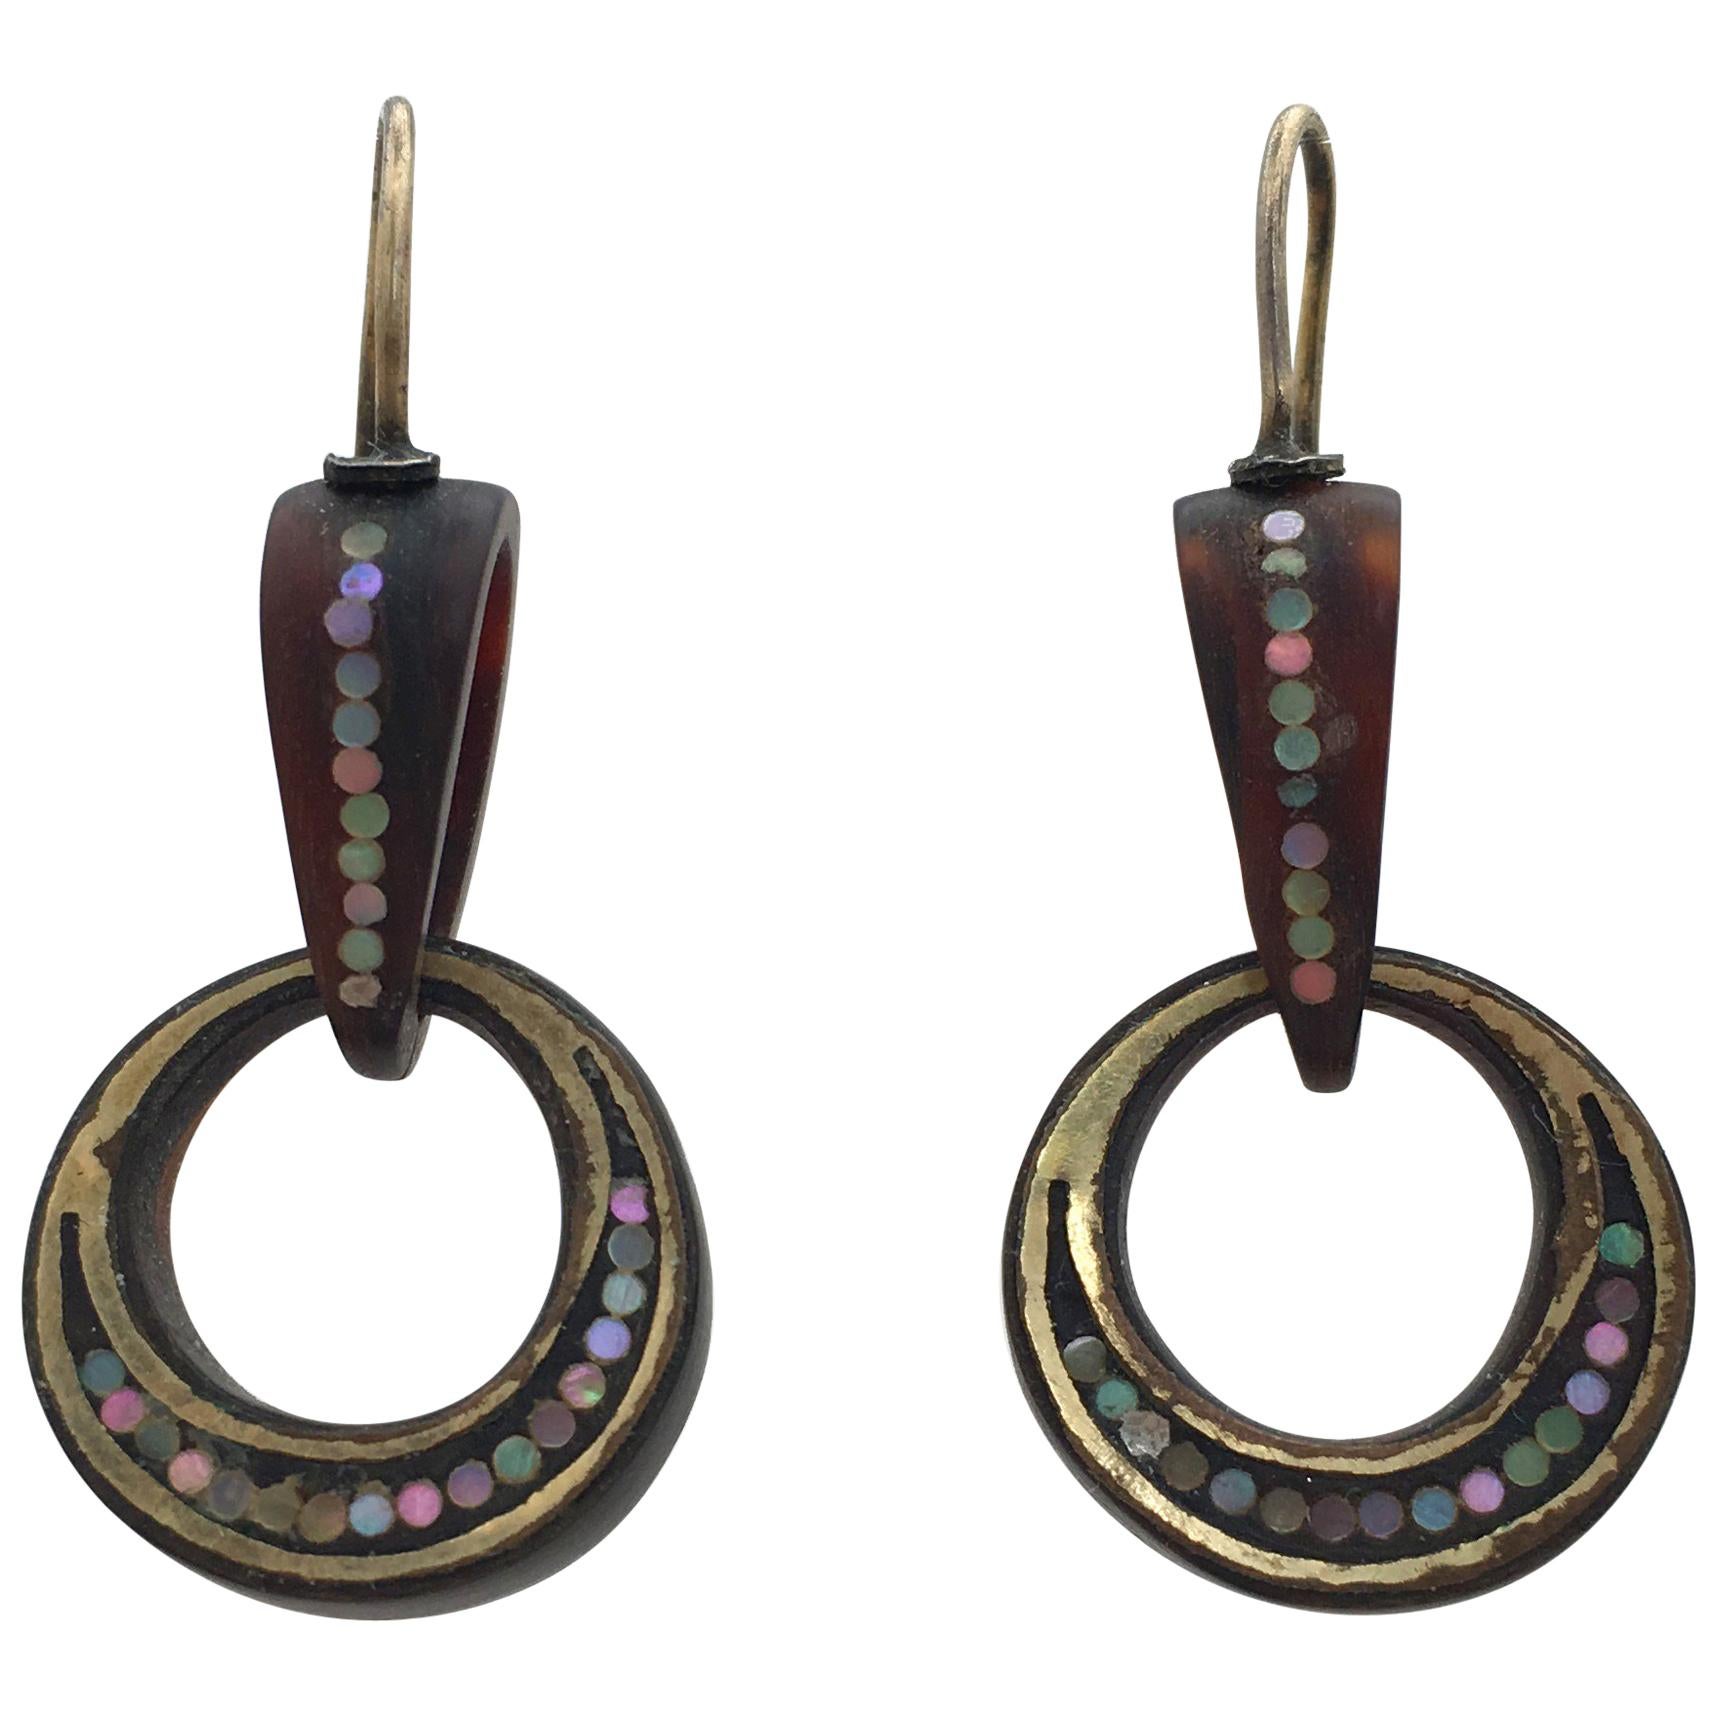 Antique Pique Drop Earrings Tortoiseshell Mother-of-Pearl Crescent Moon Hoops For Sale